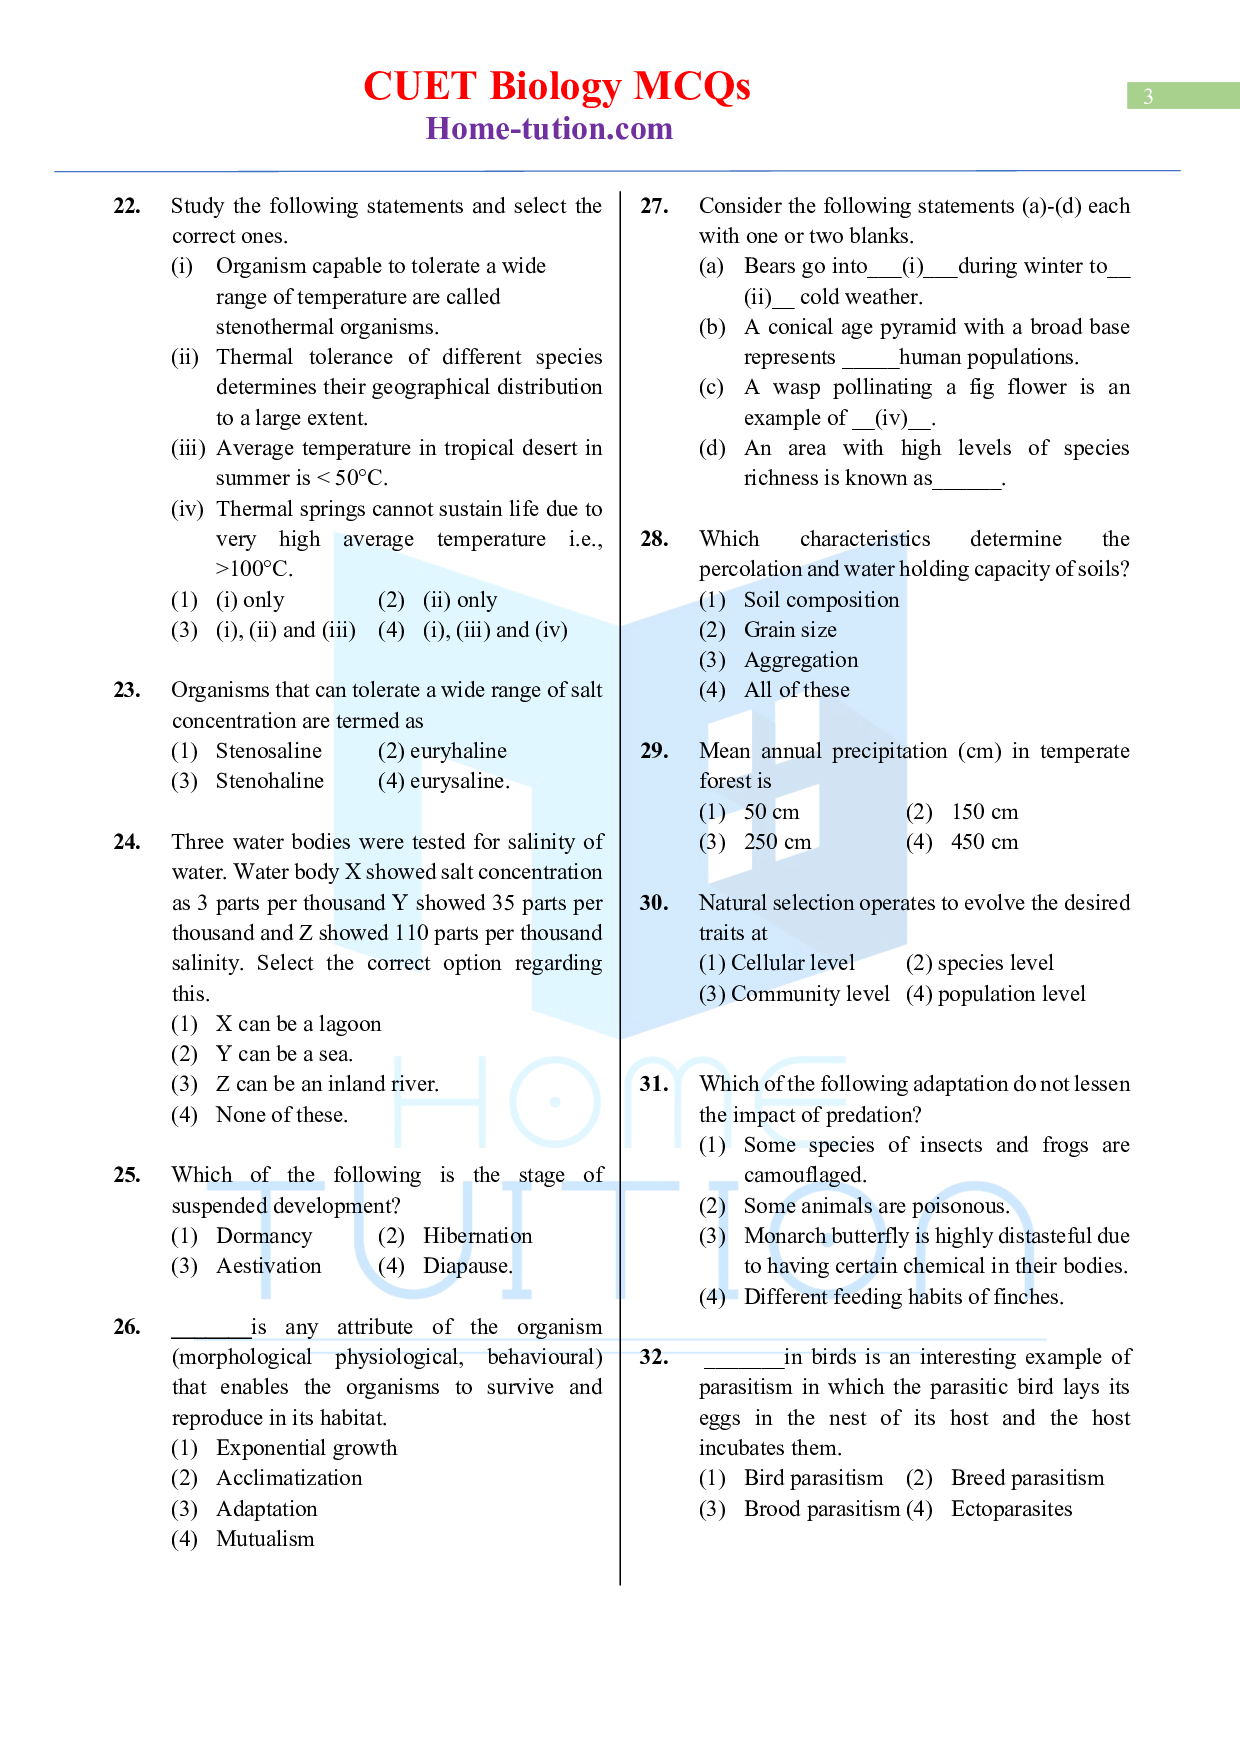 Biology MCQ Questions for CUET Chapter 13 Organisms and Populations